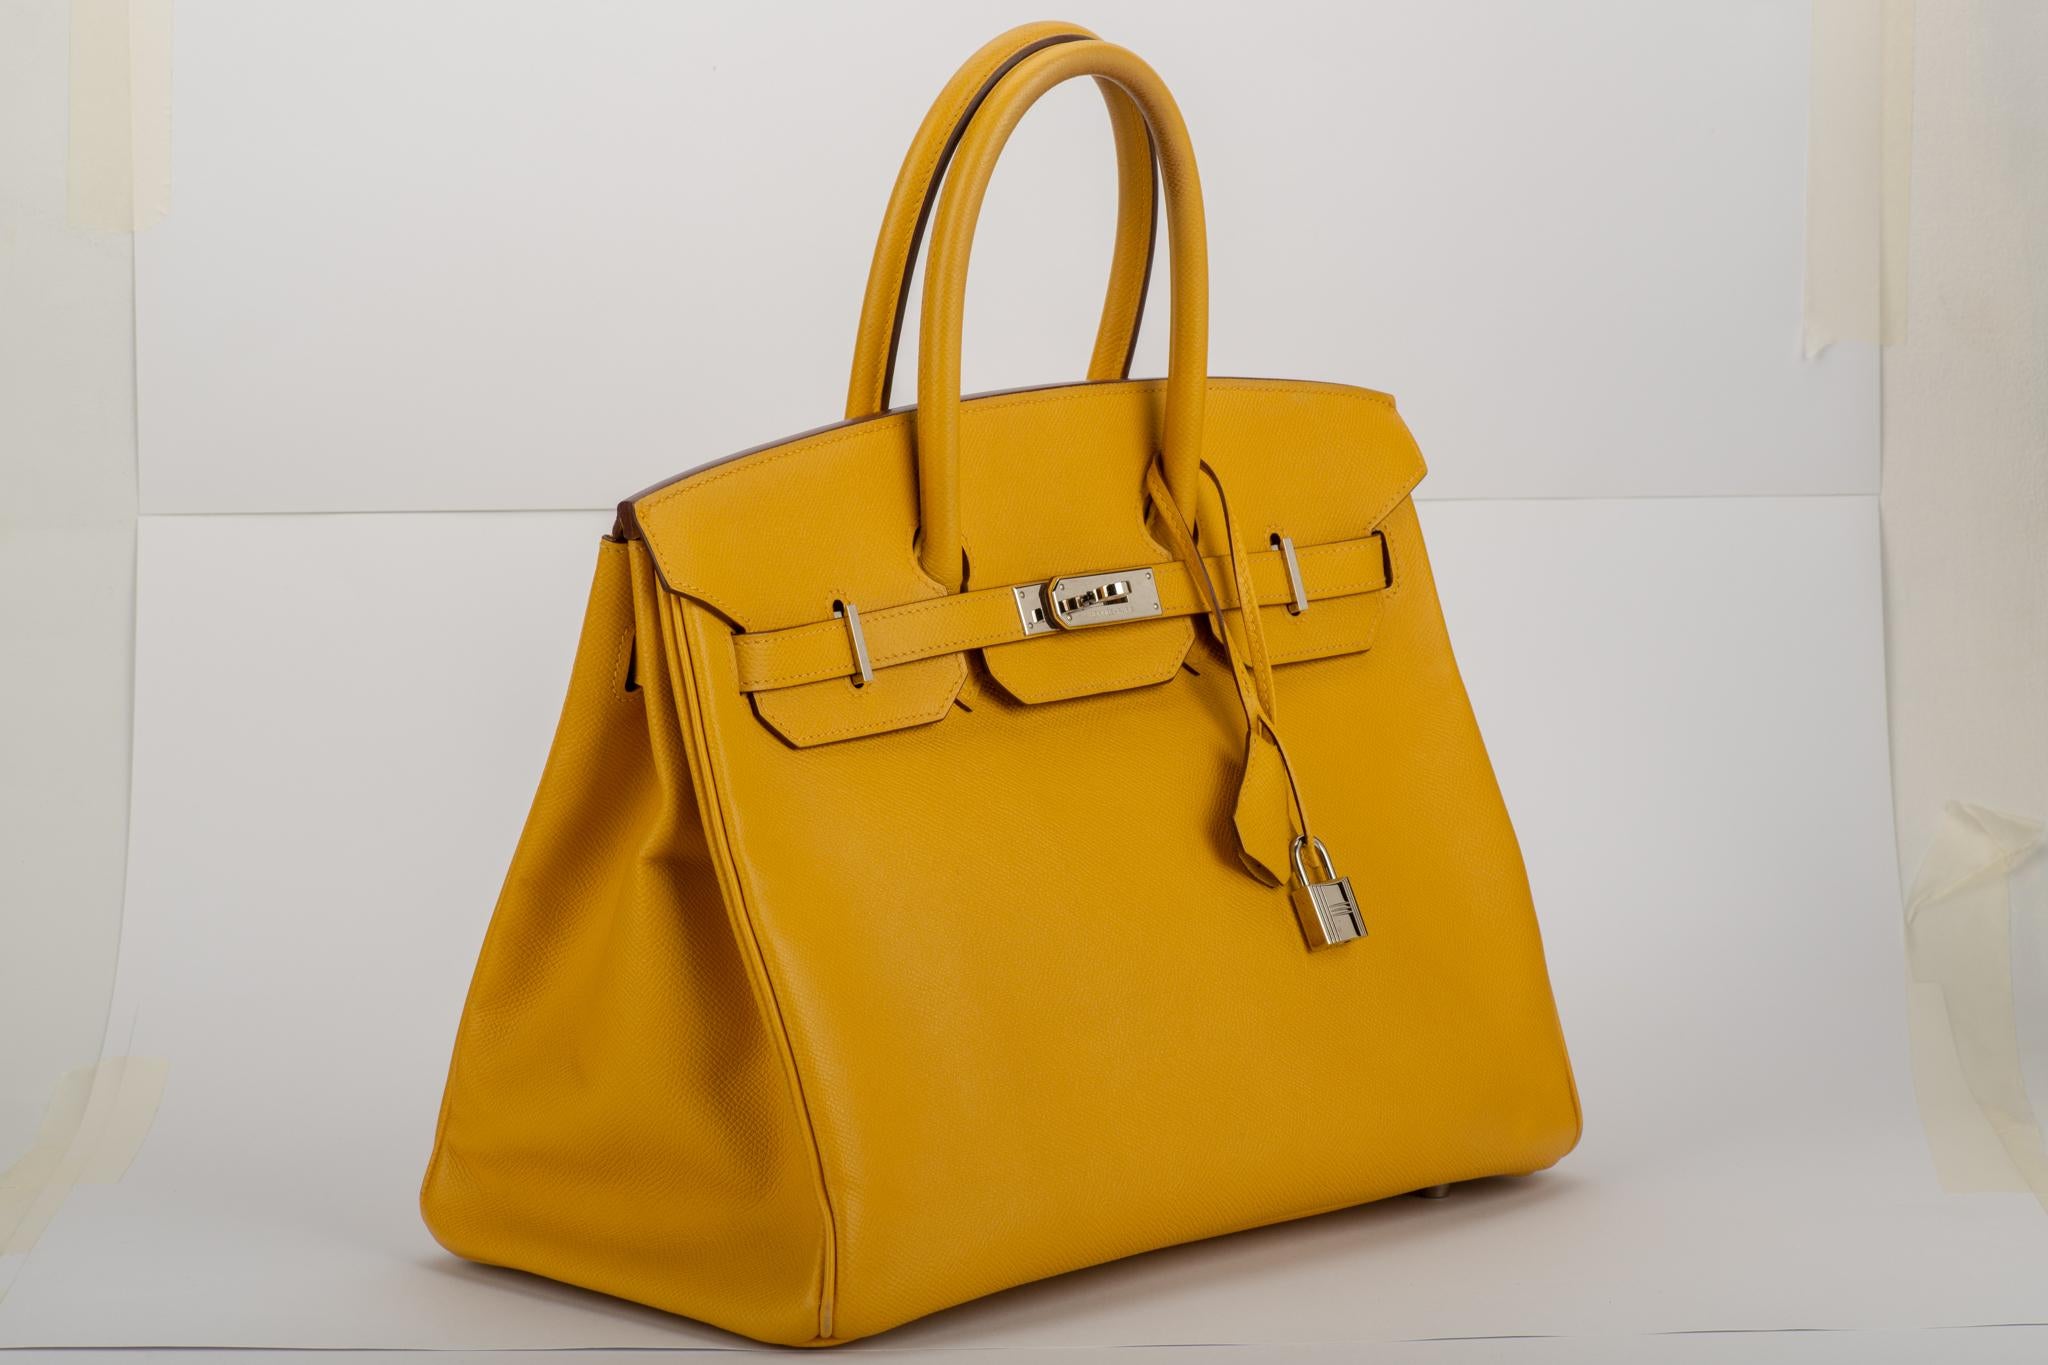 Hermes rare birkin 35 cm in jaune d'or epsom leather with palladium hardware. Date stamp M for 2009. Comes with clochette, tirette, two locks, keys, generic dust cover.